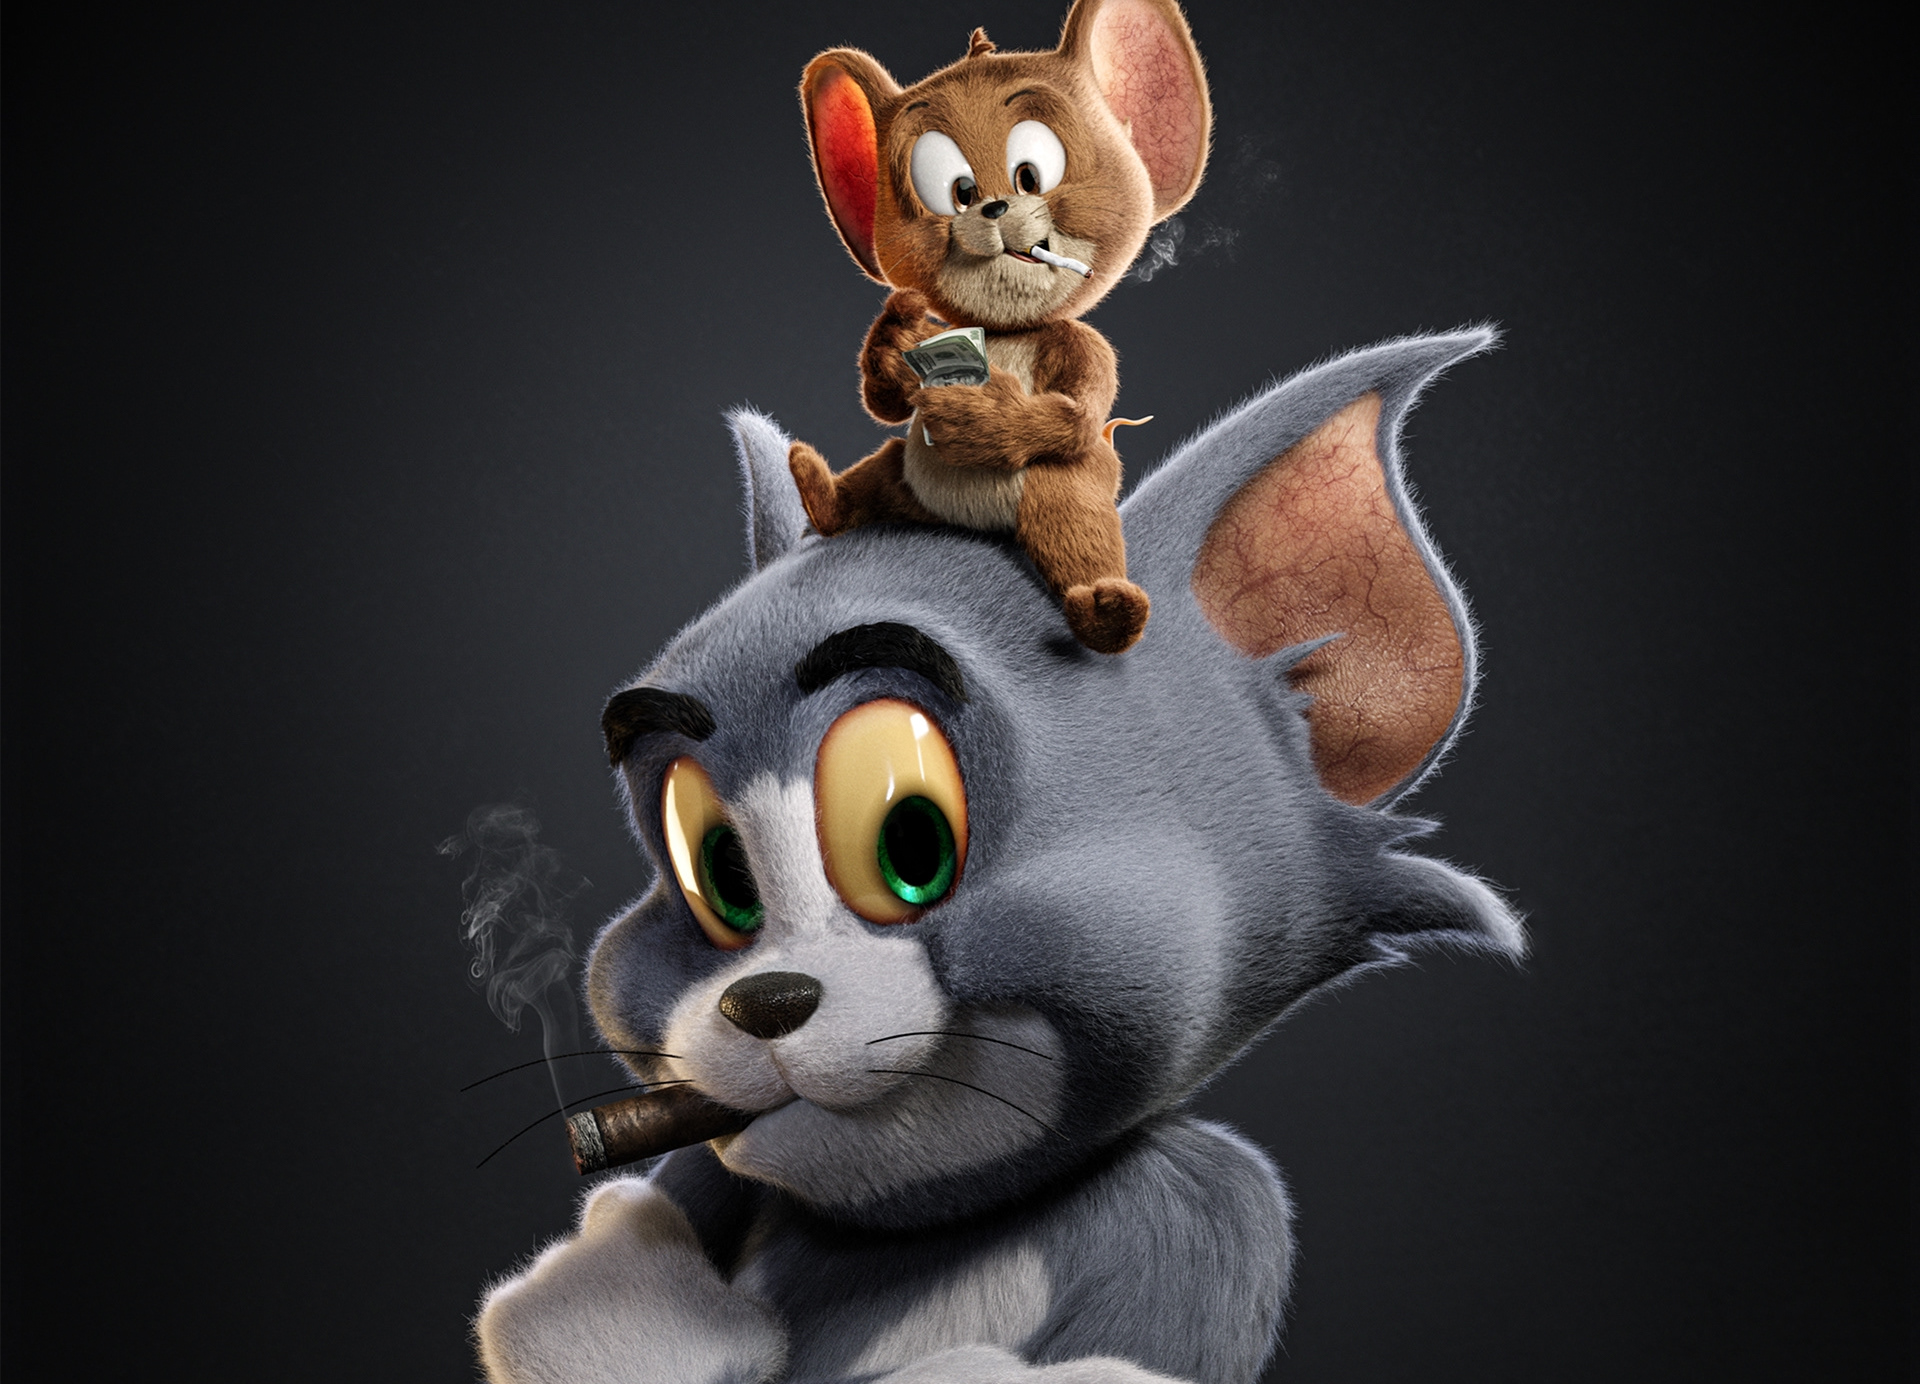 Mischievous take on classic cartoon characters in 3D